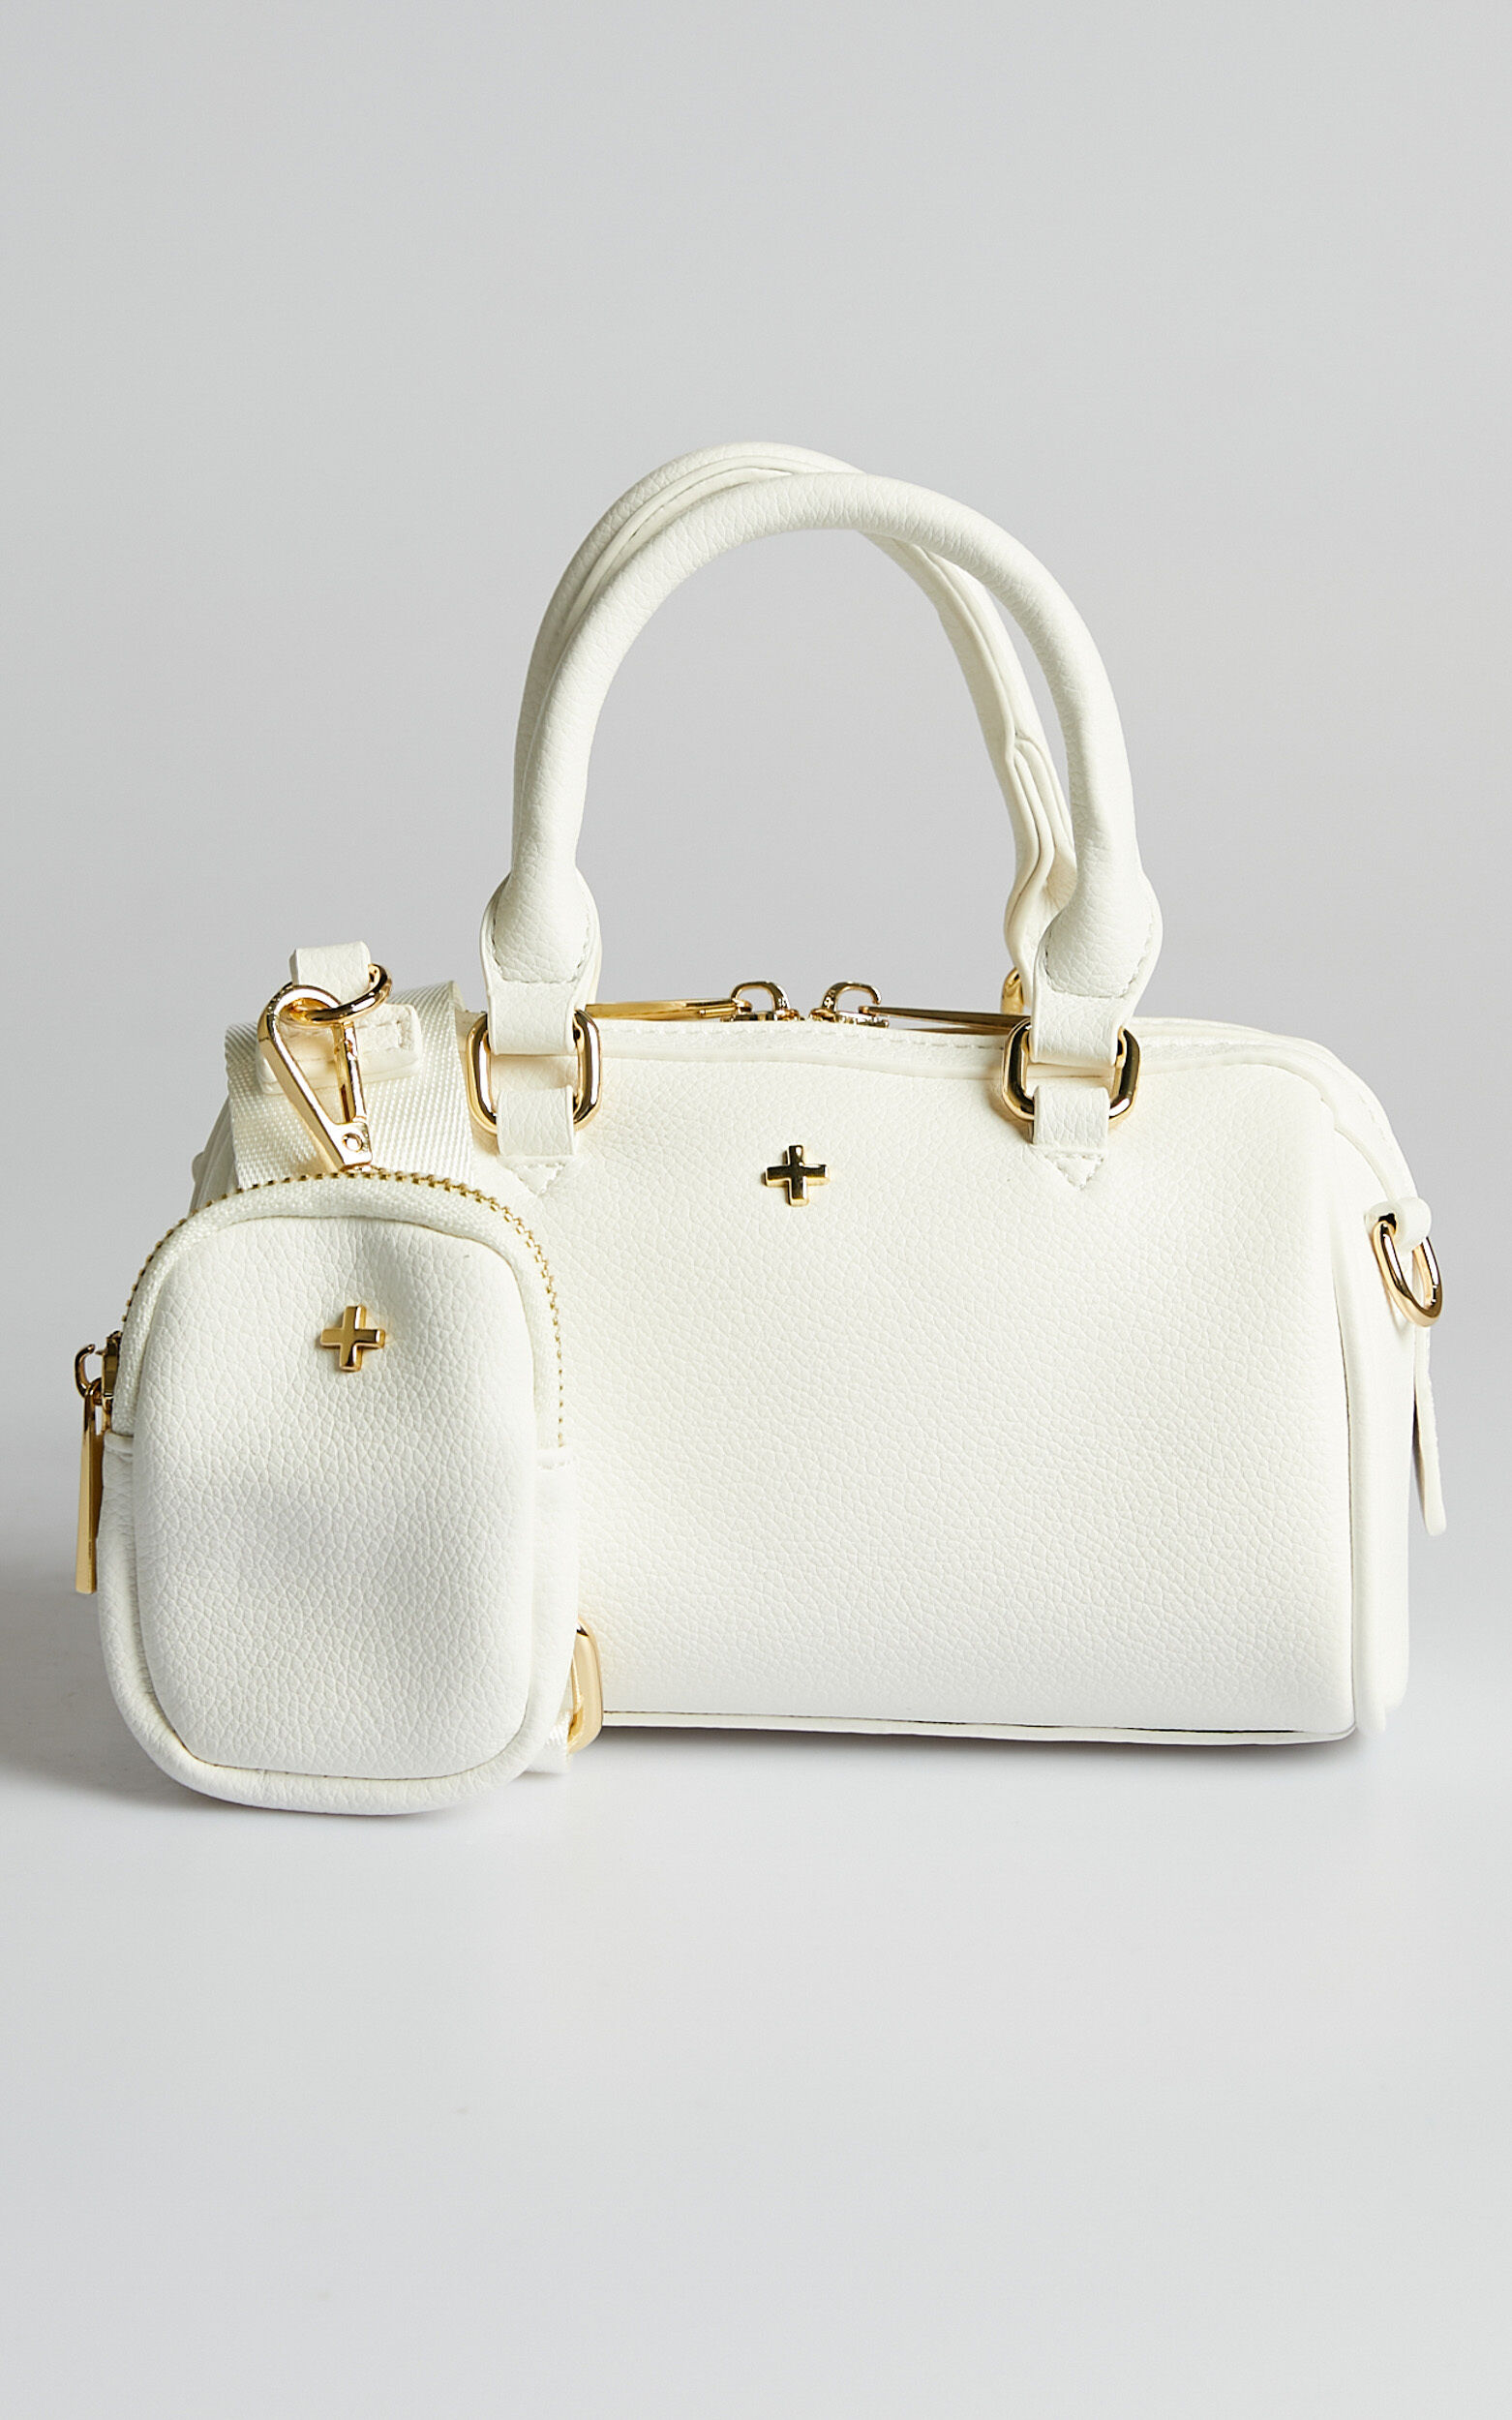 Peta and Jain - Bounty Bag in White Pebble/Gold - NoSize, WHT1, super-hi-res image number null